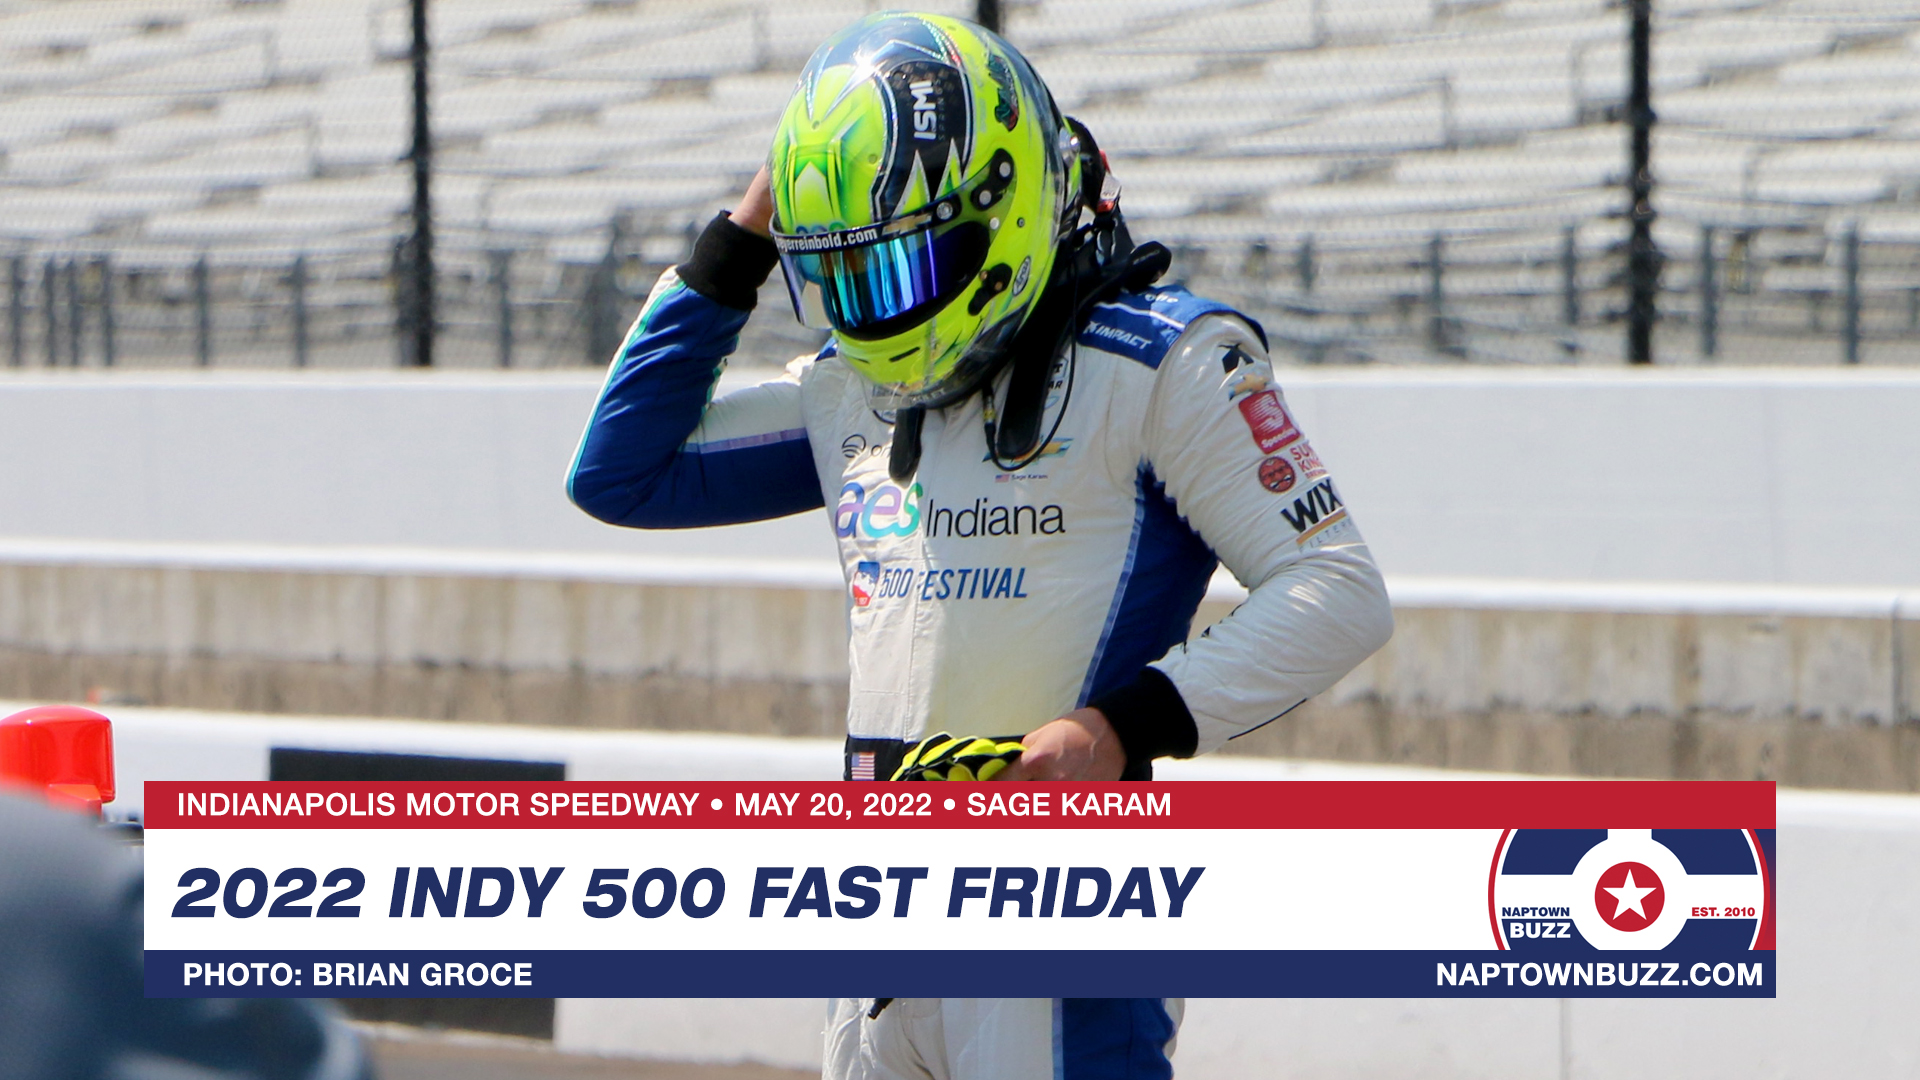 Sage Karam on Indy 500 Fast Friday Practice at Indianapolis Motor Speedway on May 20, 2022